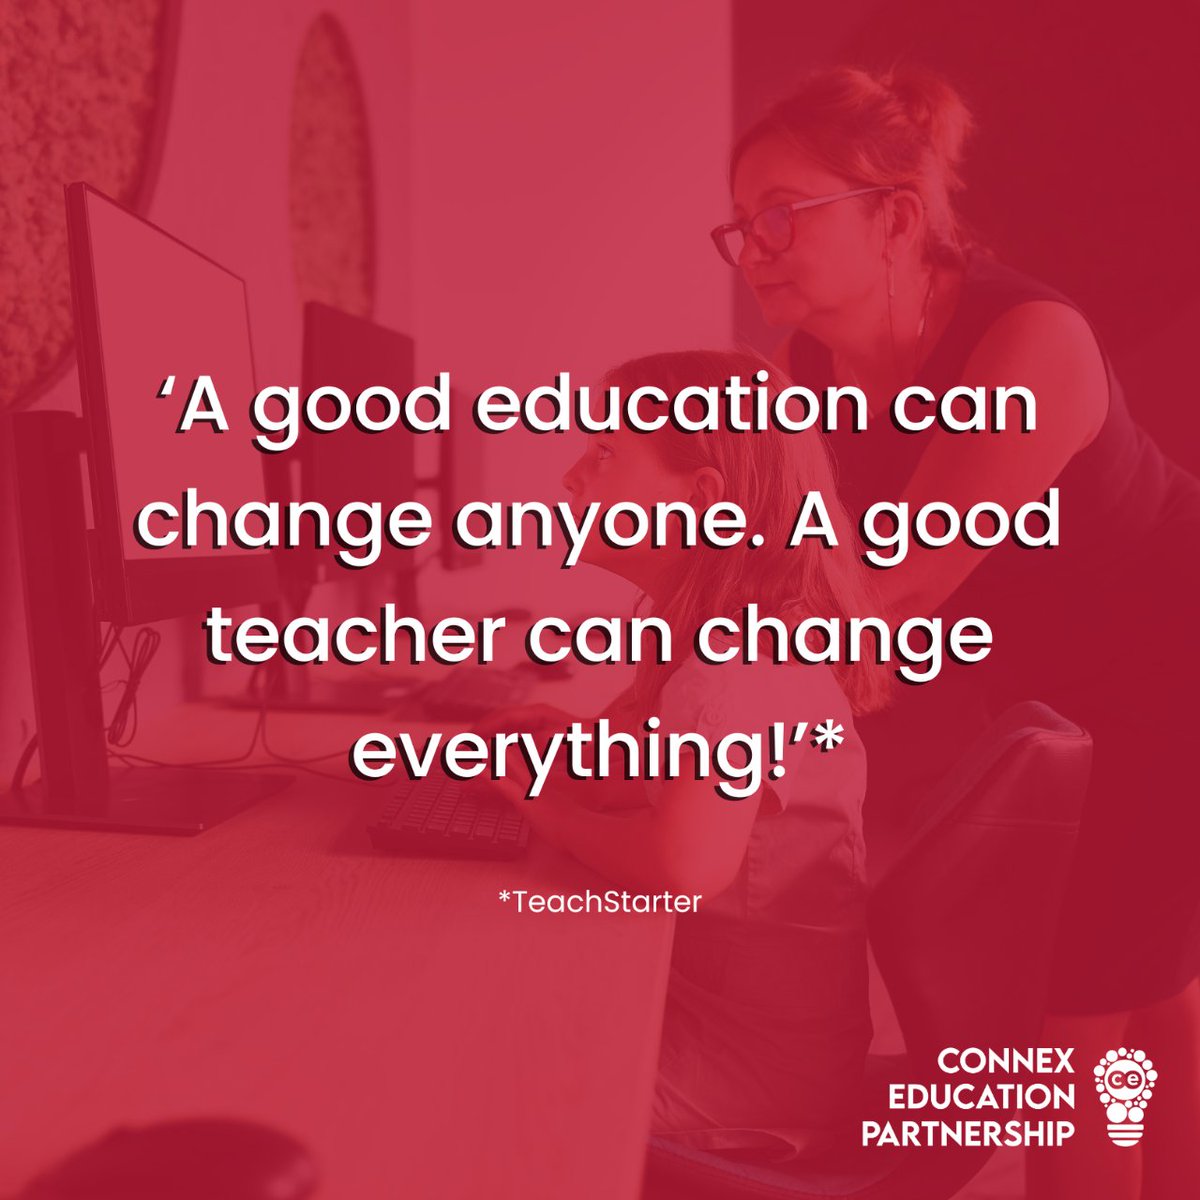 Today, and every day, we're grateful for the incredible teachers and educators who shape our future. 🍎 

Thank you for your dedication, passion, and hard work in educating and inspiring generations. 👏

#TeacherAppreciation #ThankATeacher #Grateful